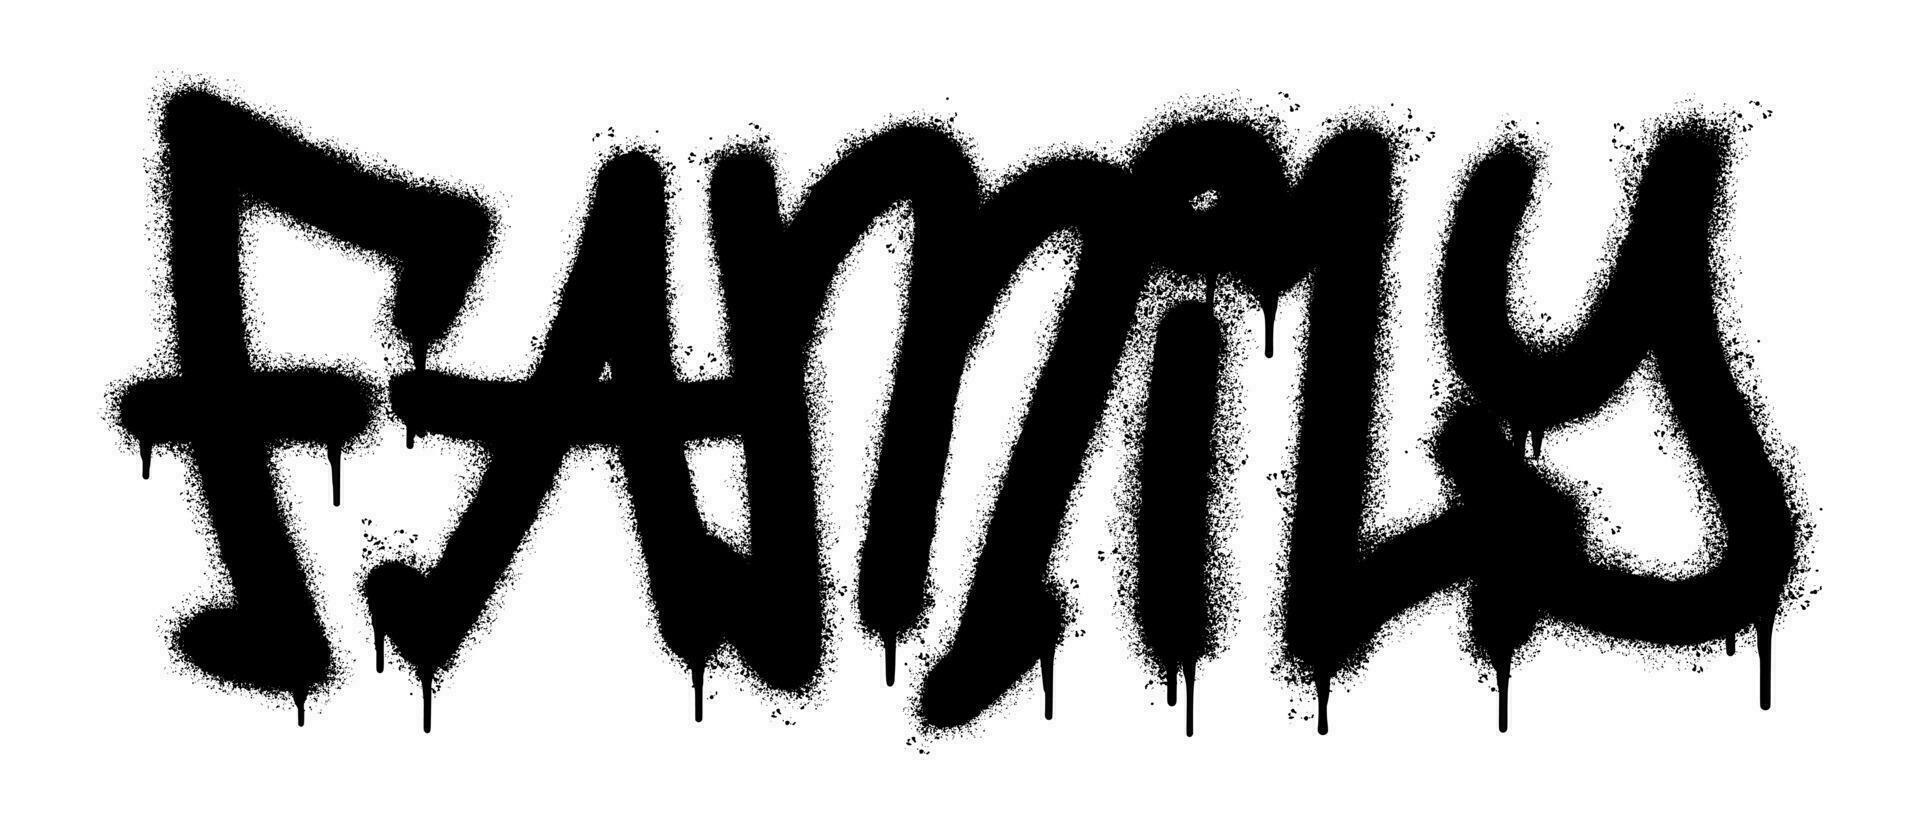 Spray Painted Graffiti Family Word Sprayed isolated with a white background. graffiti font Family with over spray in black over white. vector